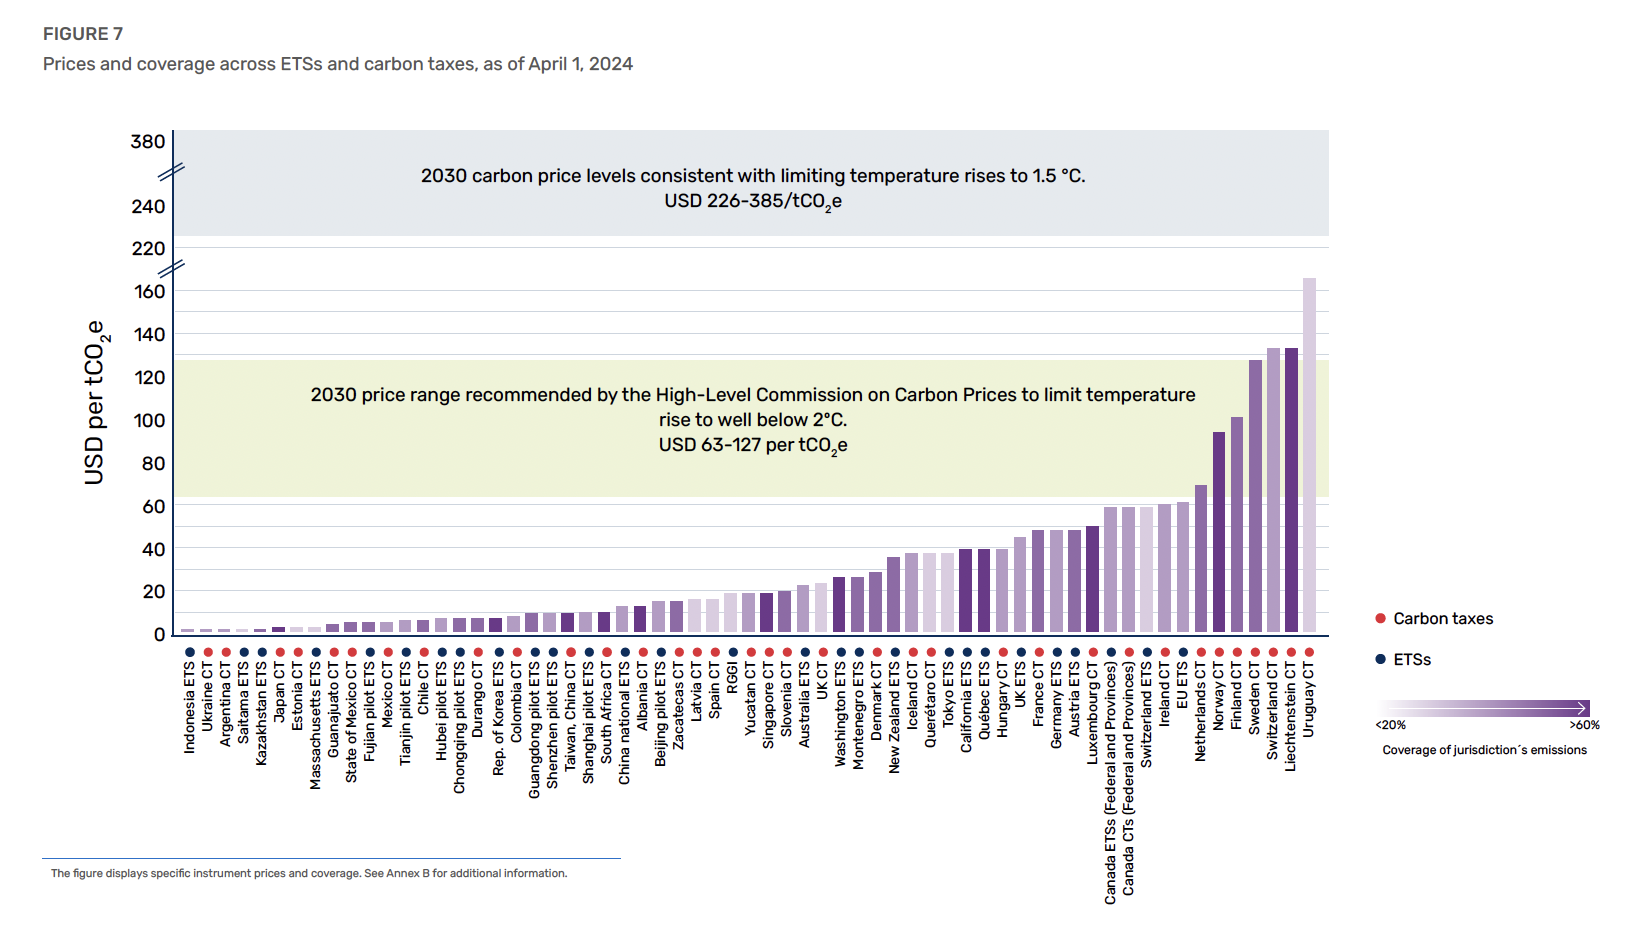 Prices and coverage across ETSs and carbon taxes, as of April 1, 2024